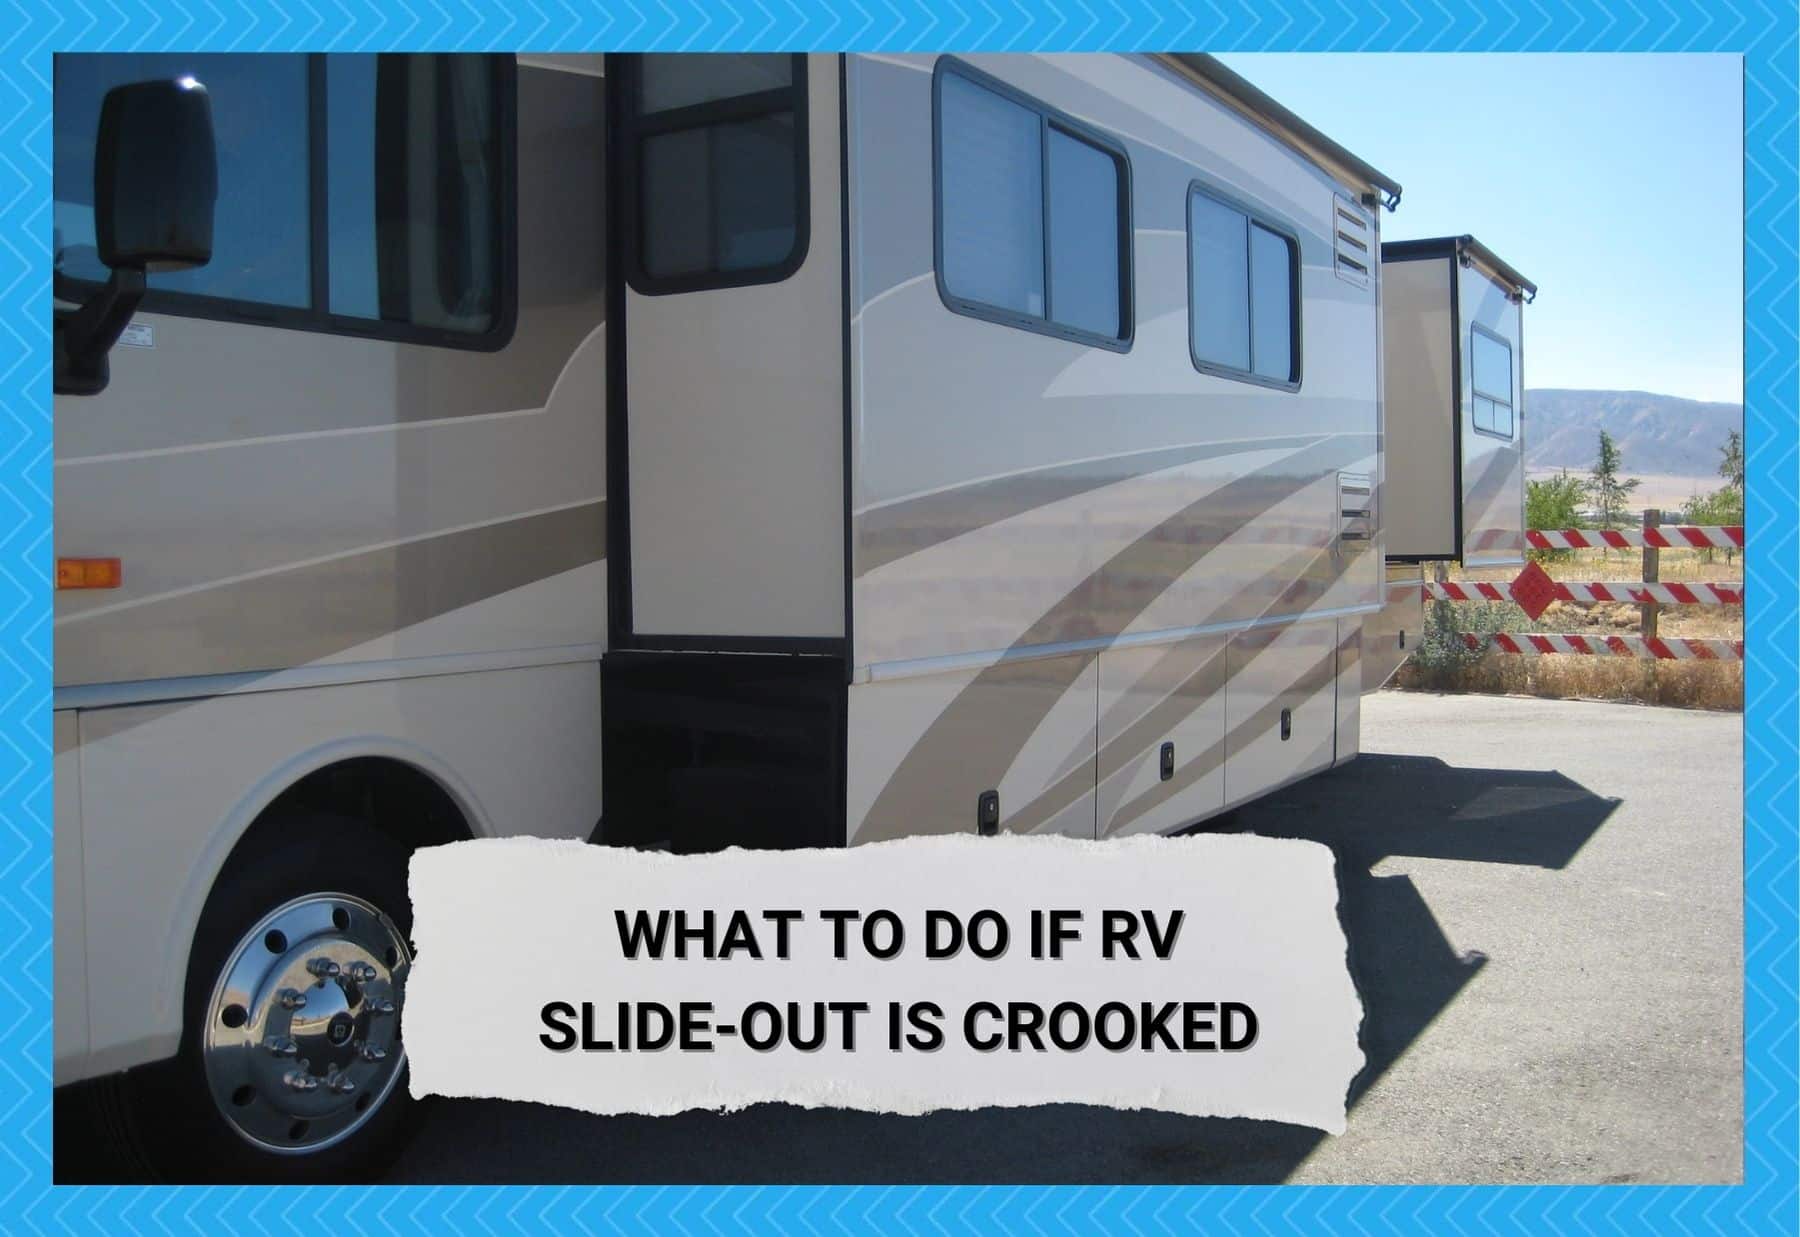 RV Slide-out is Crooked